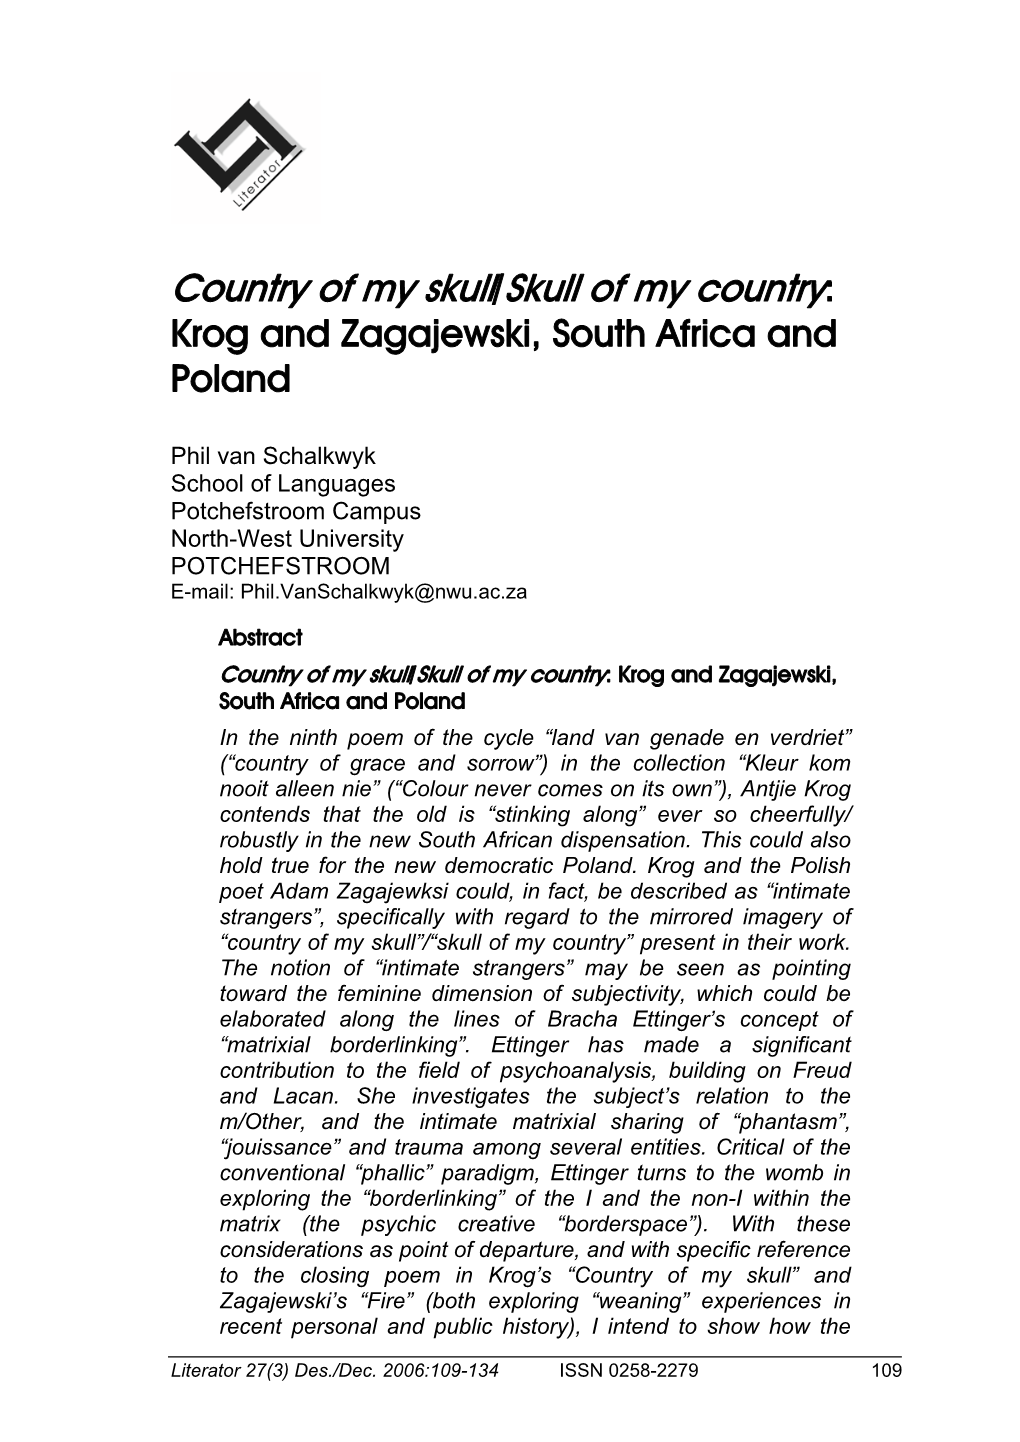 Country of My Skull/Skull of My Country: Krog and Zagajewski, South Africa and Poland